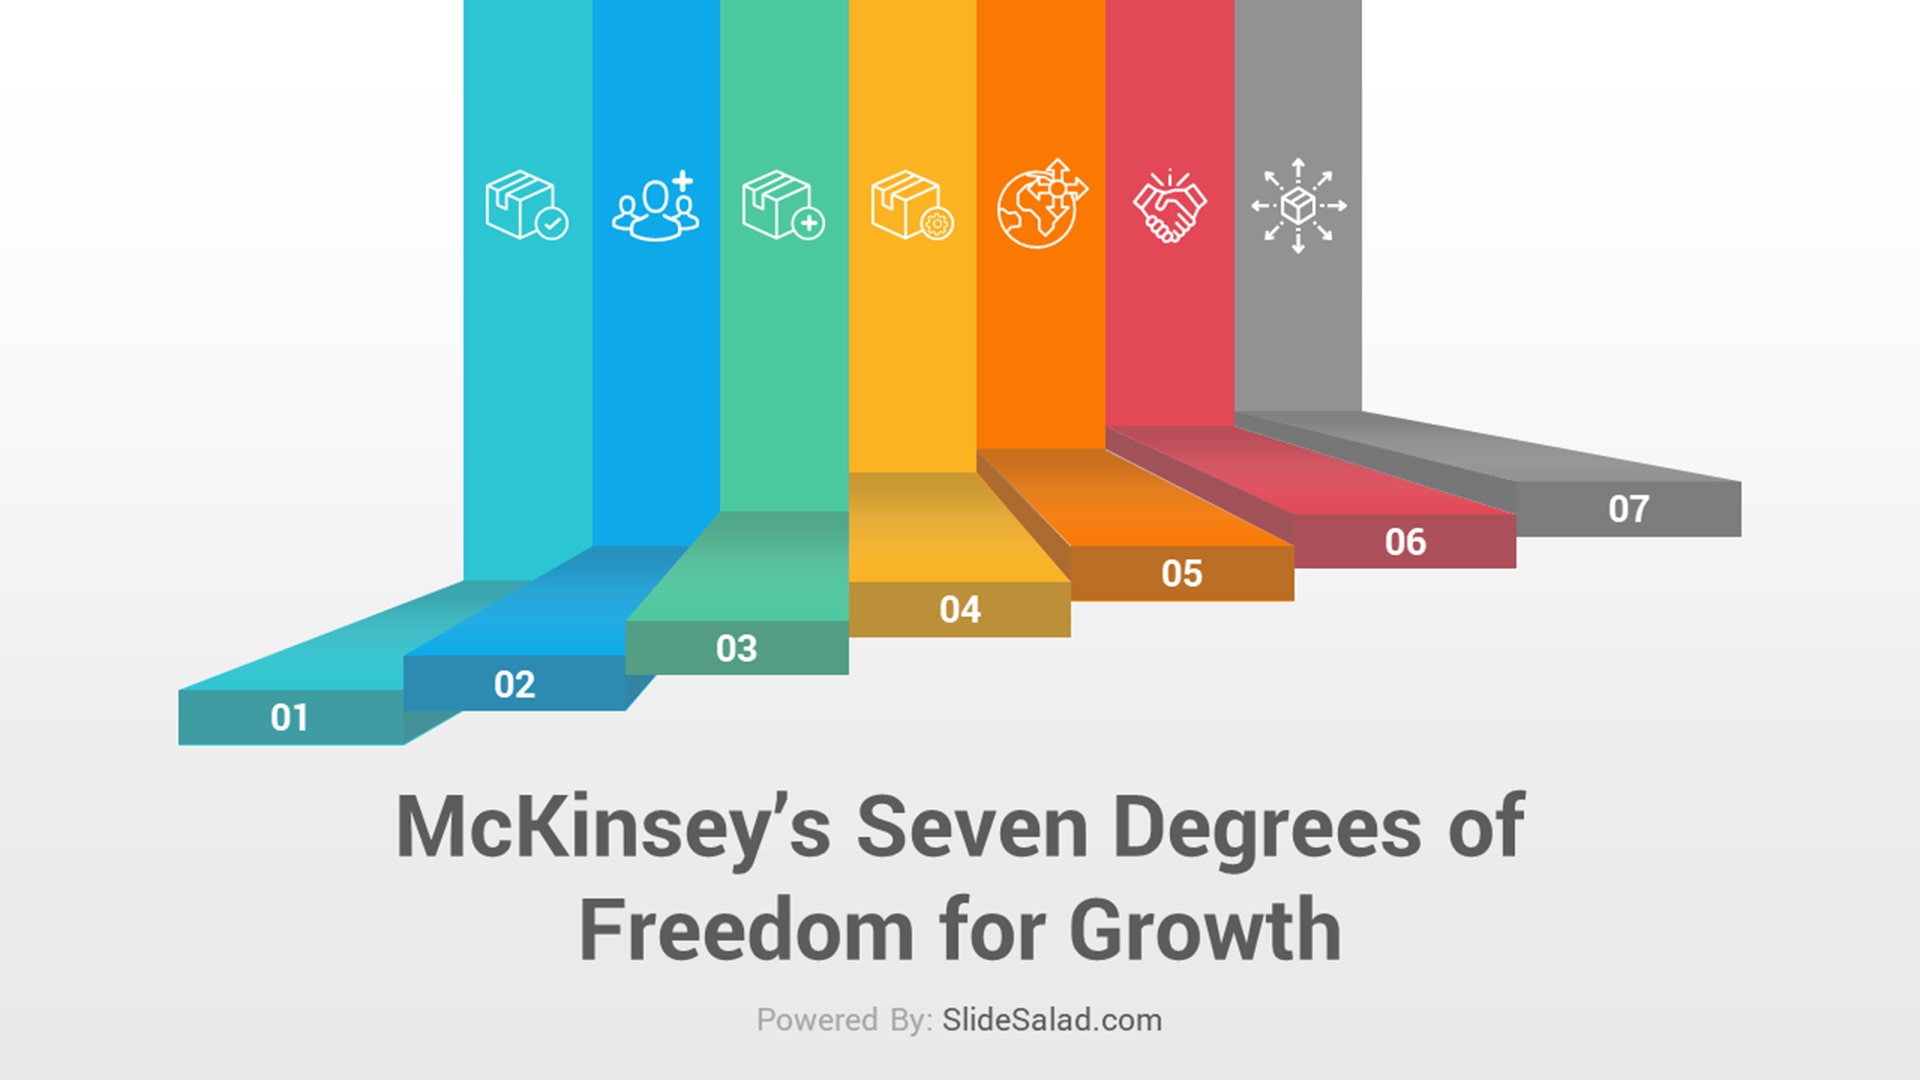 McKinsey’s Seven Degrees of Freedom for Growth PowerPoint Template